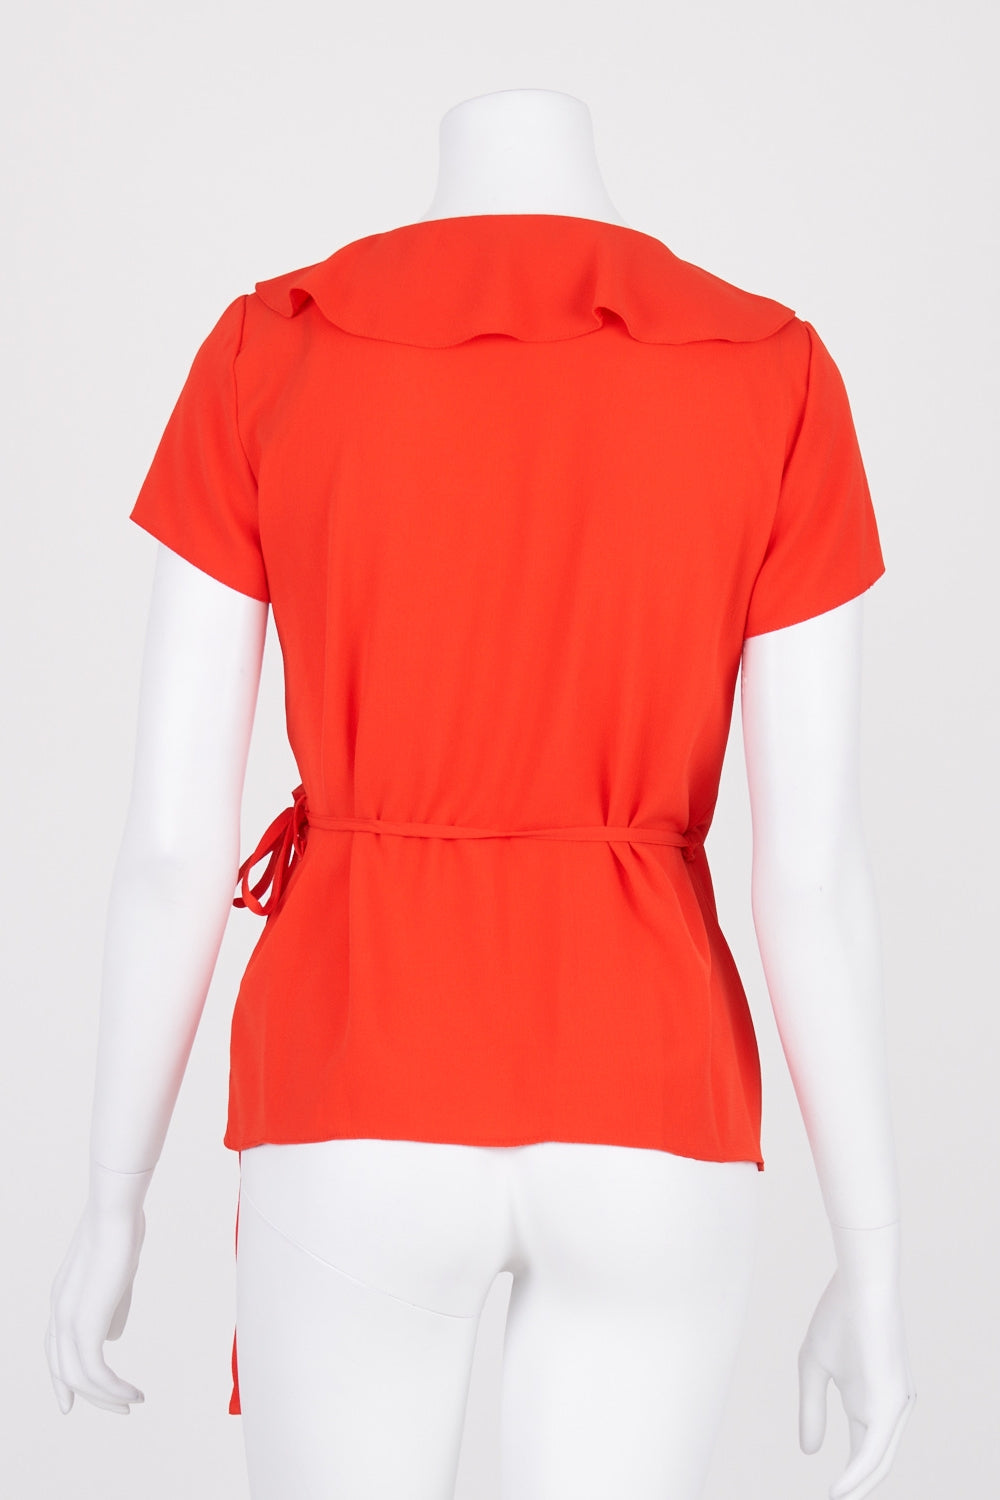 Dorothy Perkins Red Wrap Top 10